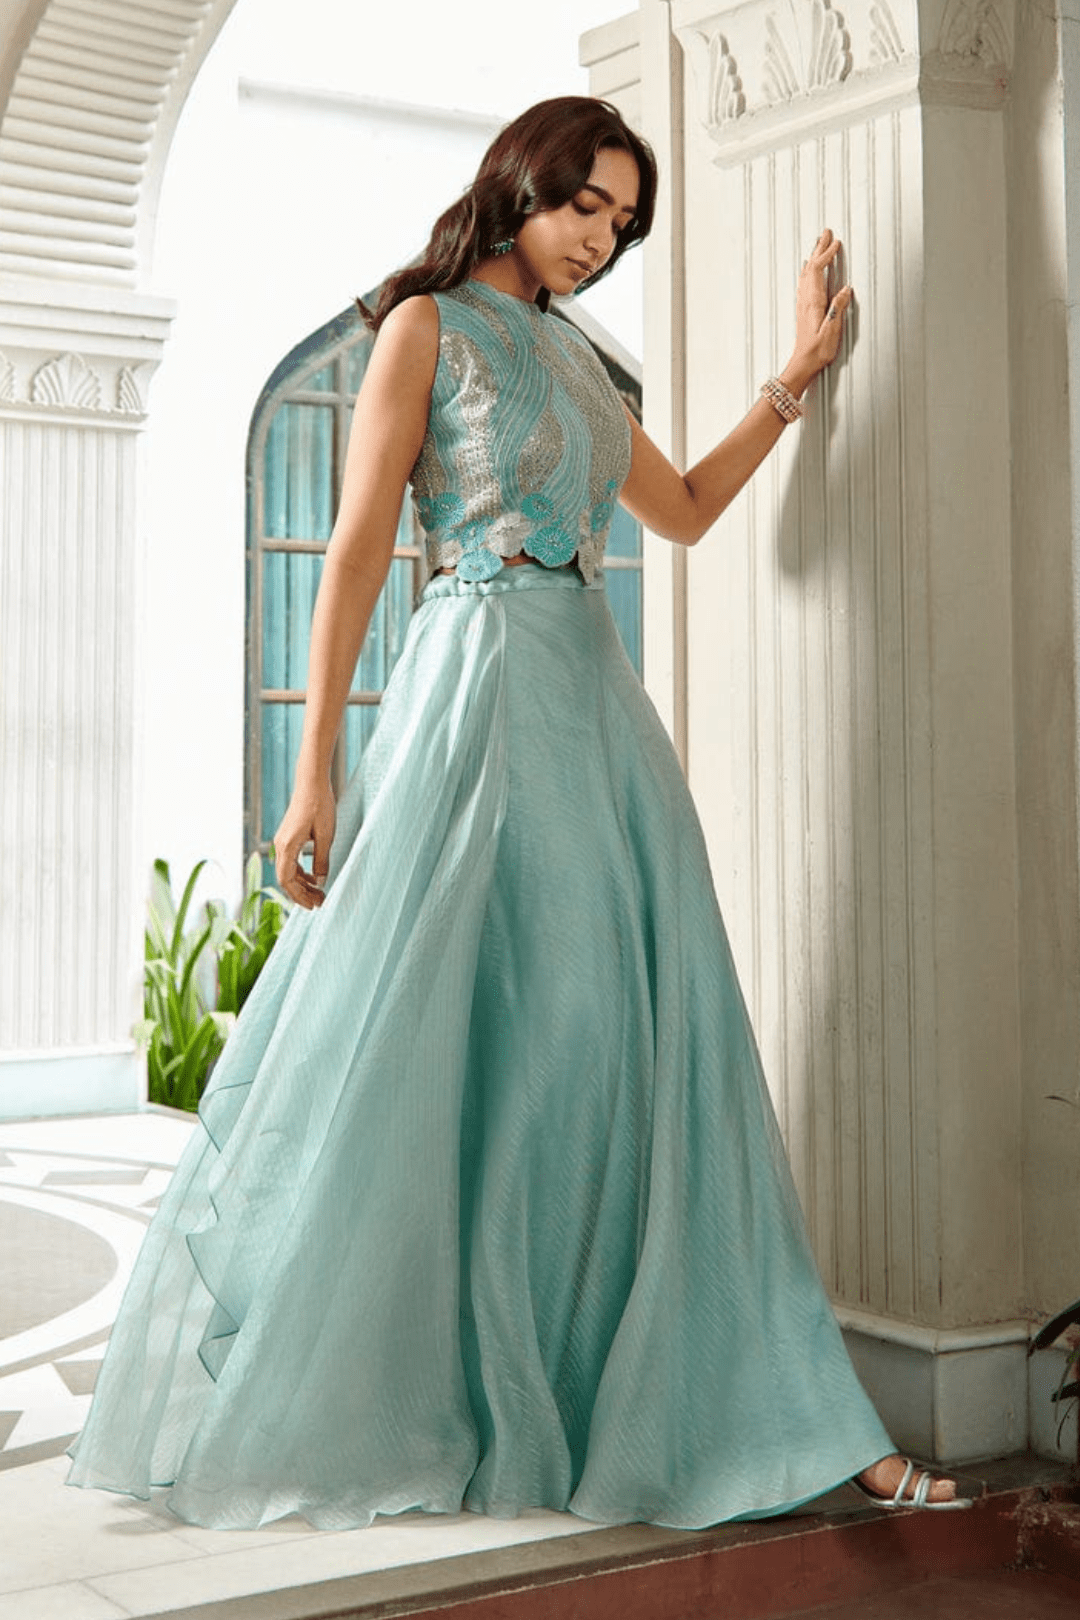 Teal Appliqued Top and Skirt